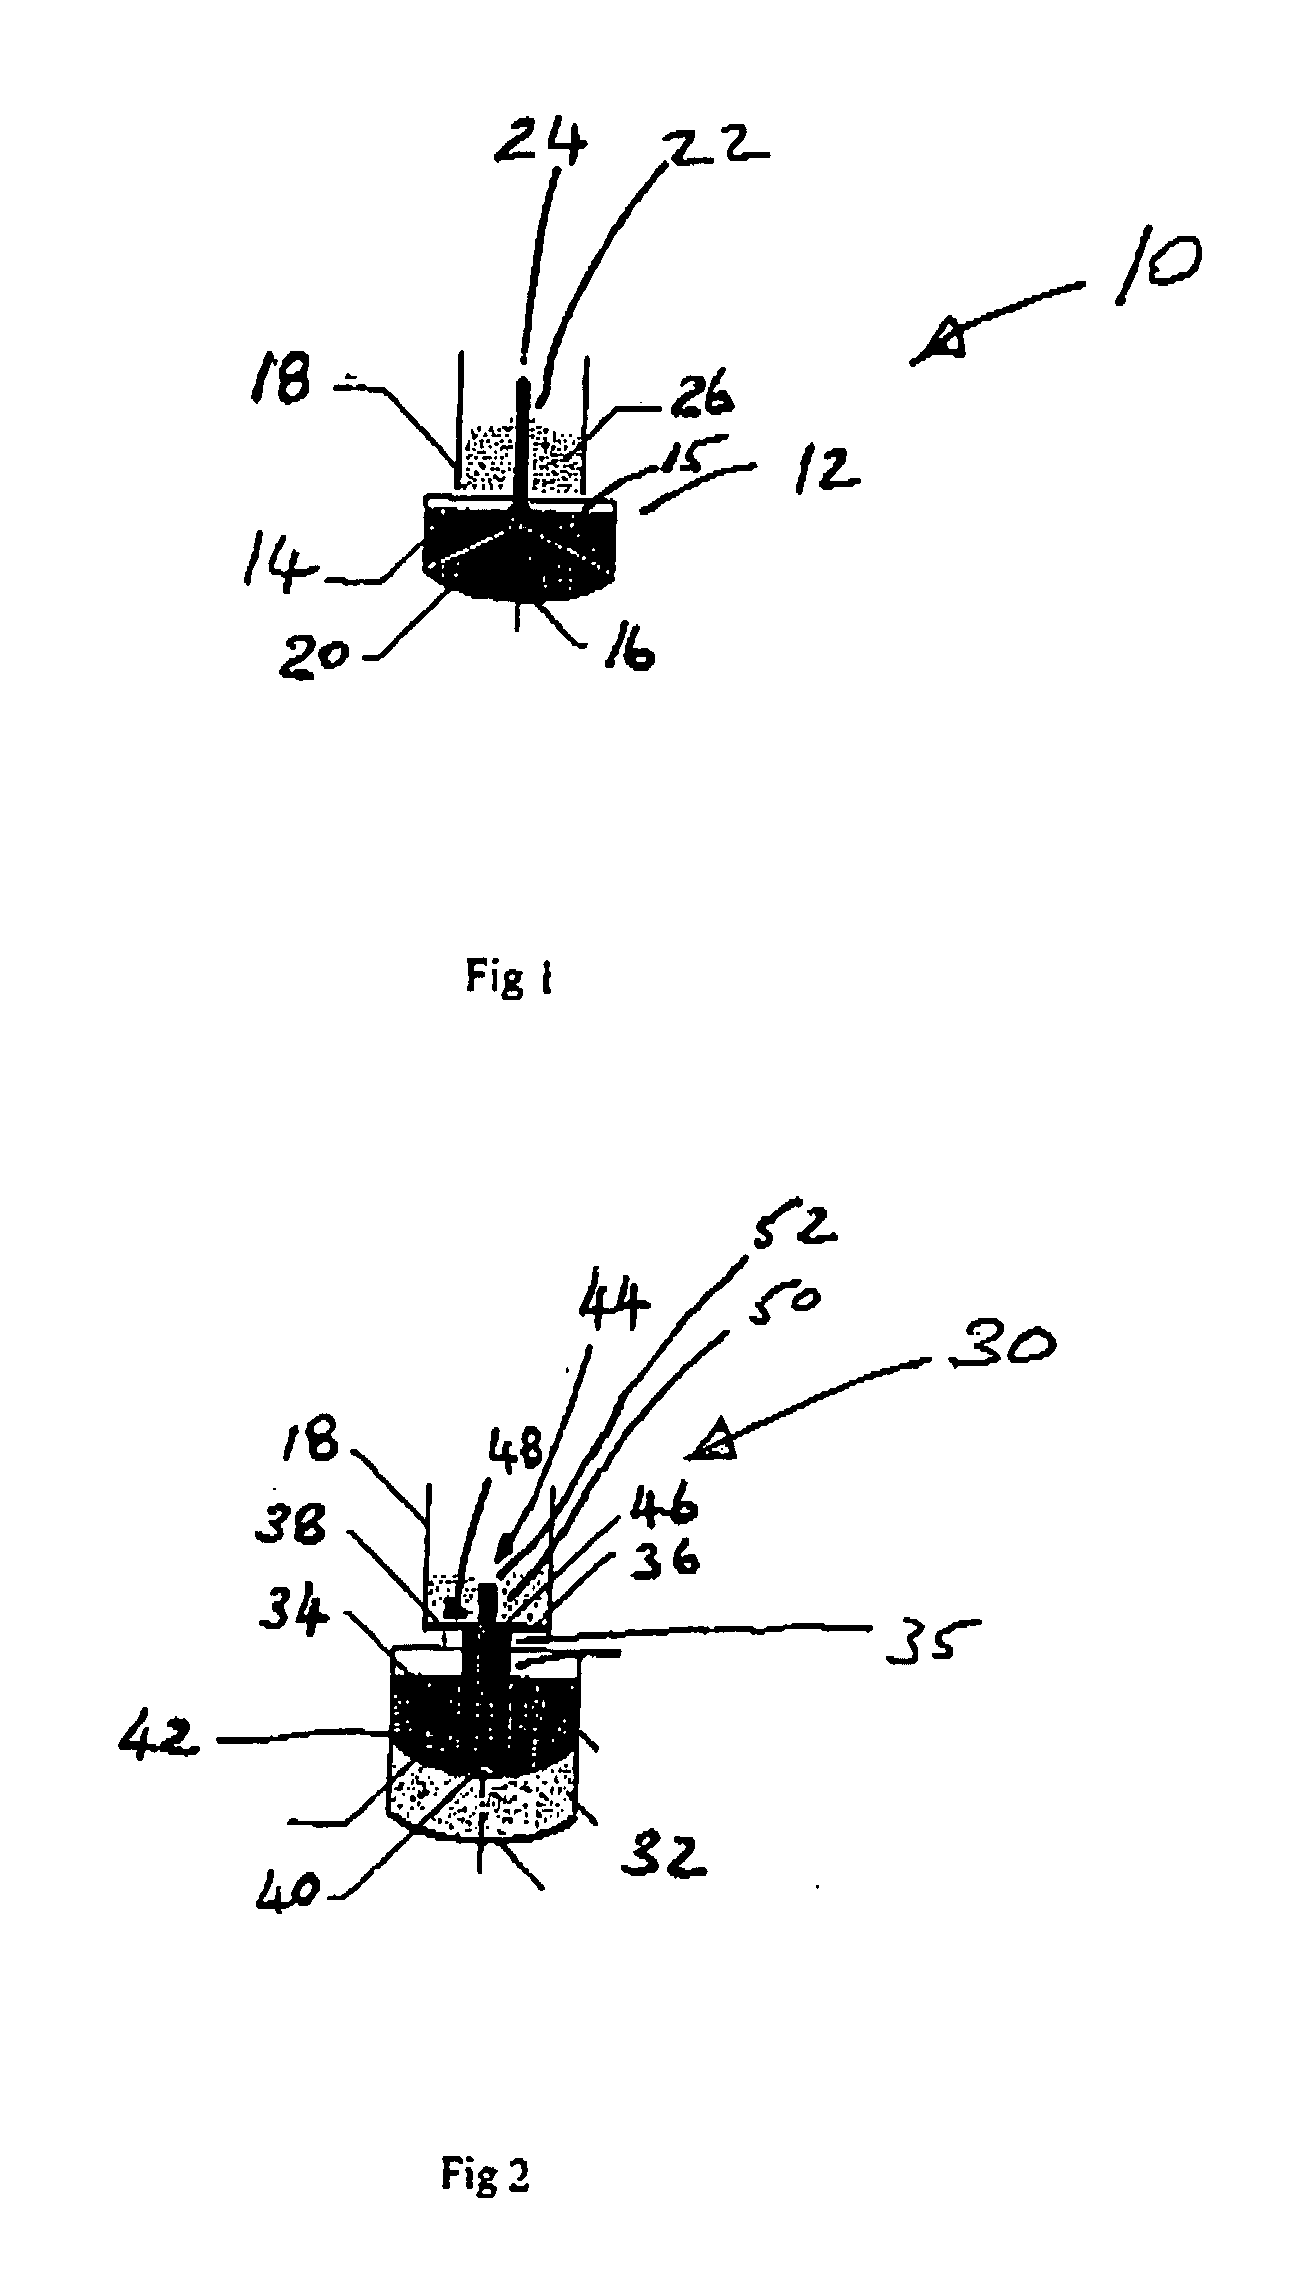 Nebulizing and drug delivery device